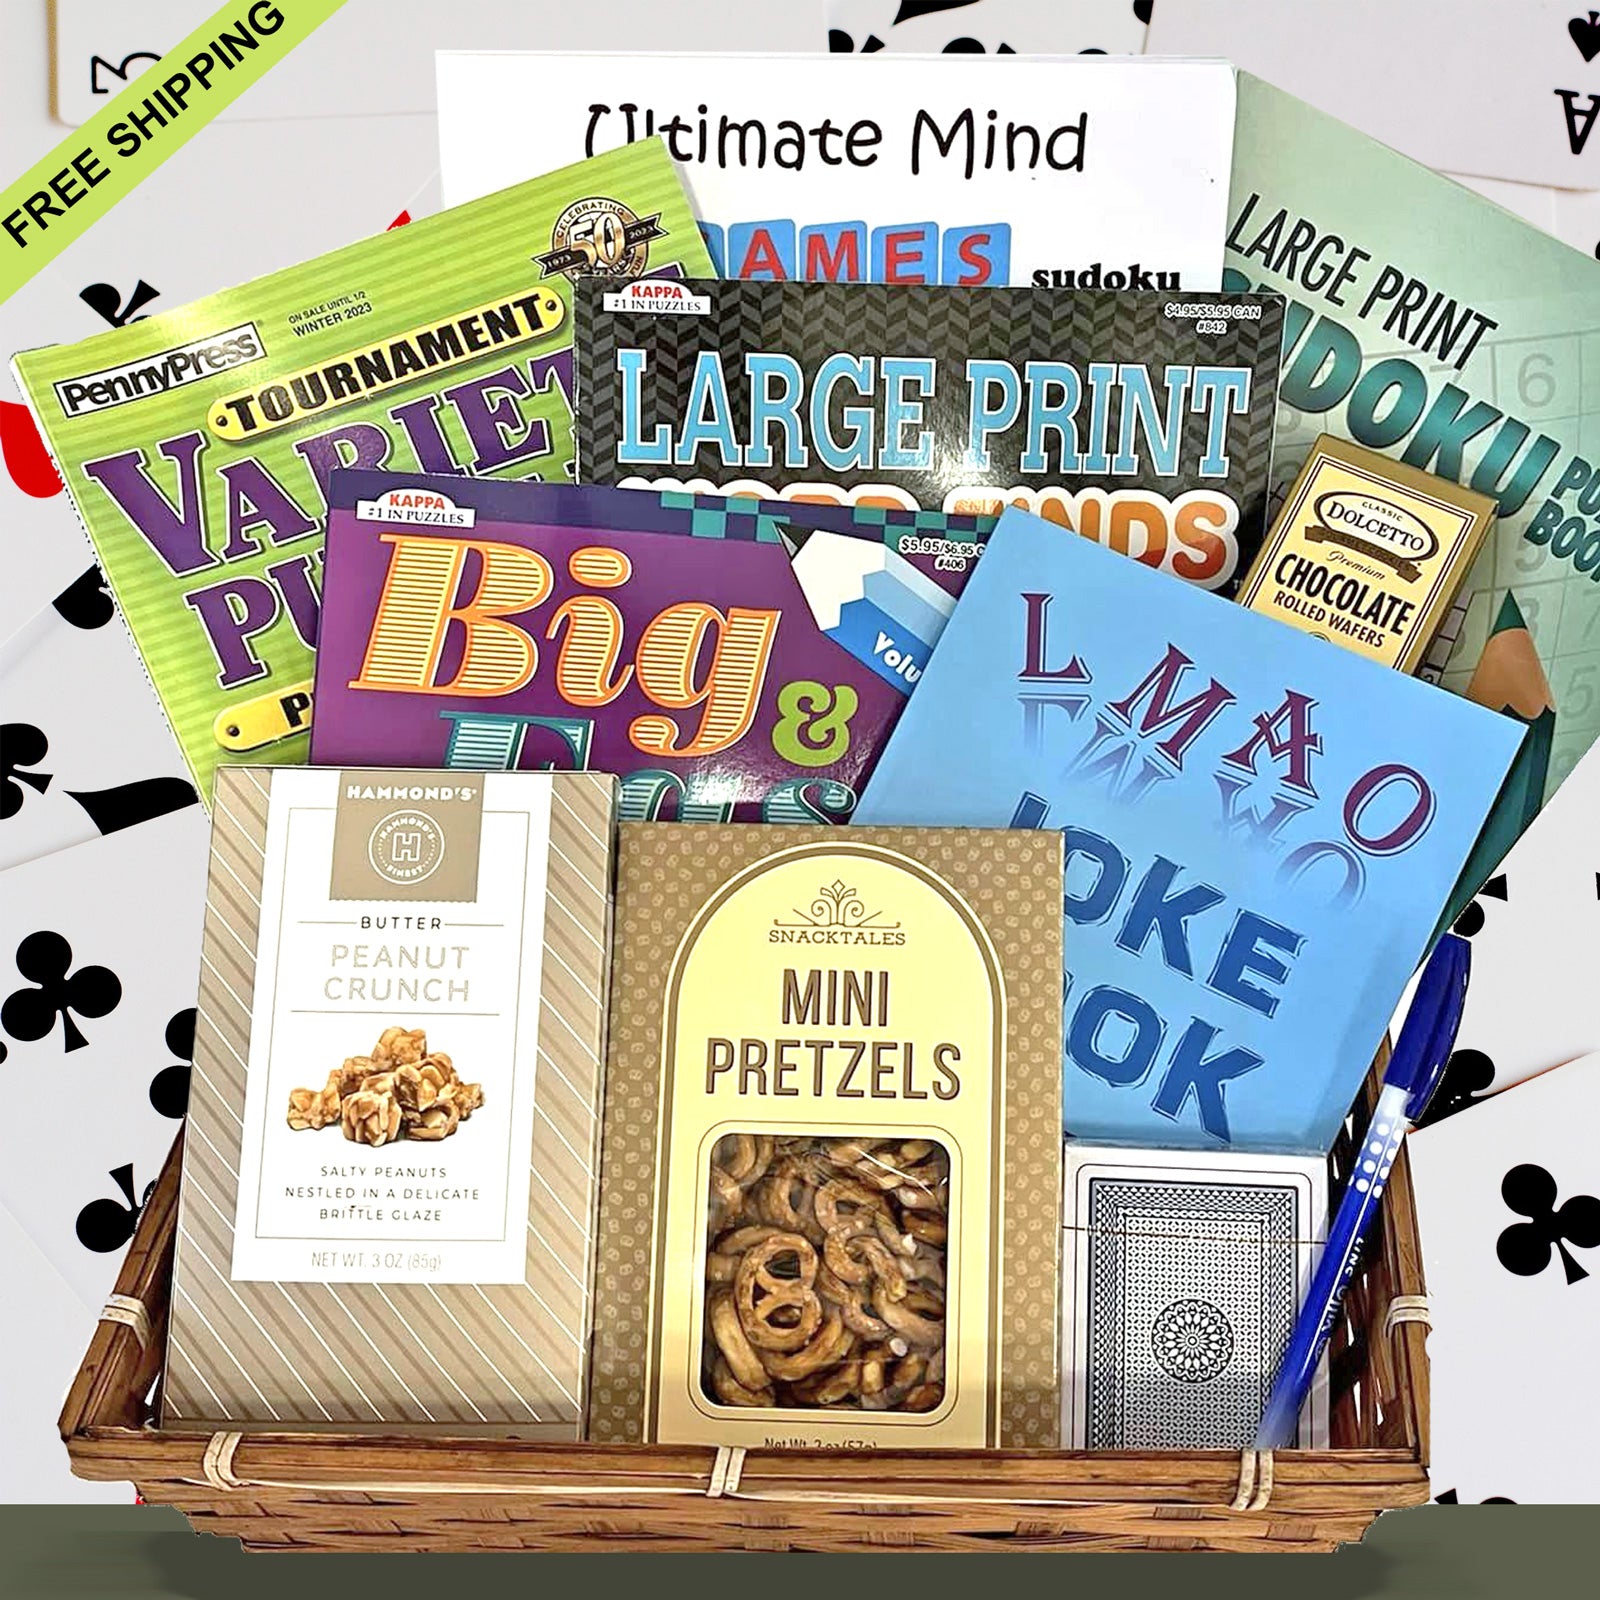 Bedrest Get Well Gift Basket for Men and for Women with Puzzle Books, Snacks and Humor Book Send Your Feel Better Soon Best Wishes for Illness, Rehab, After Surgery, Recovery